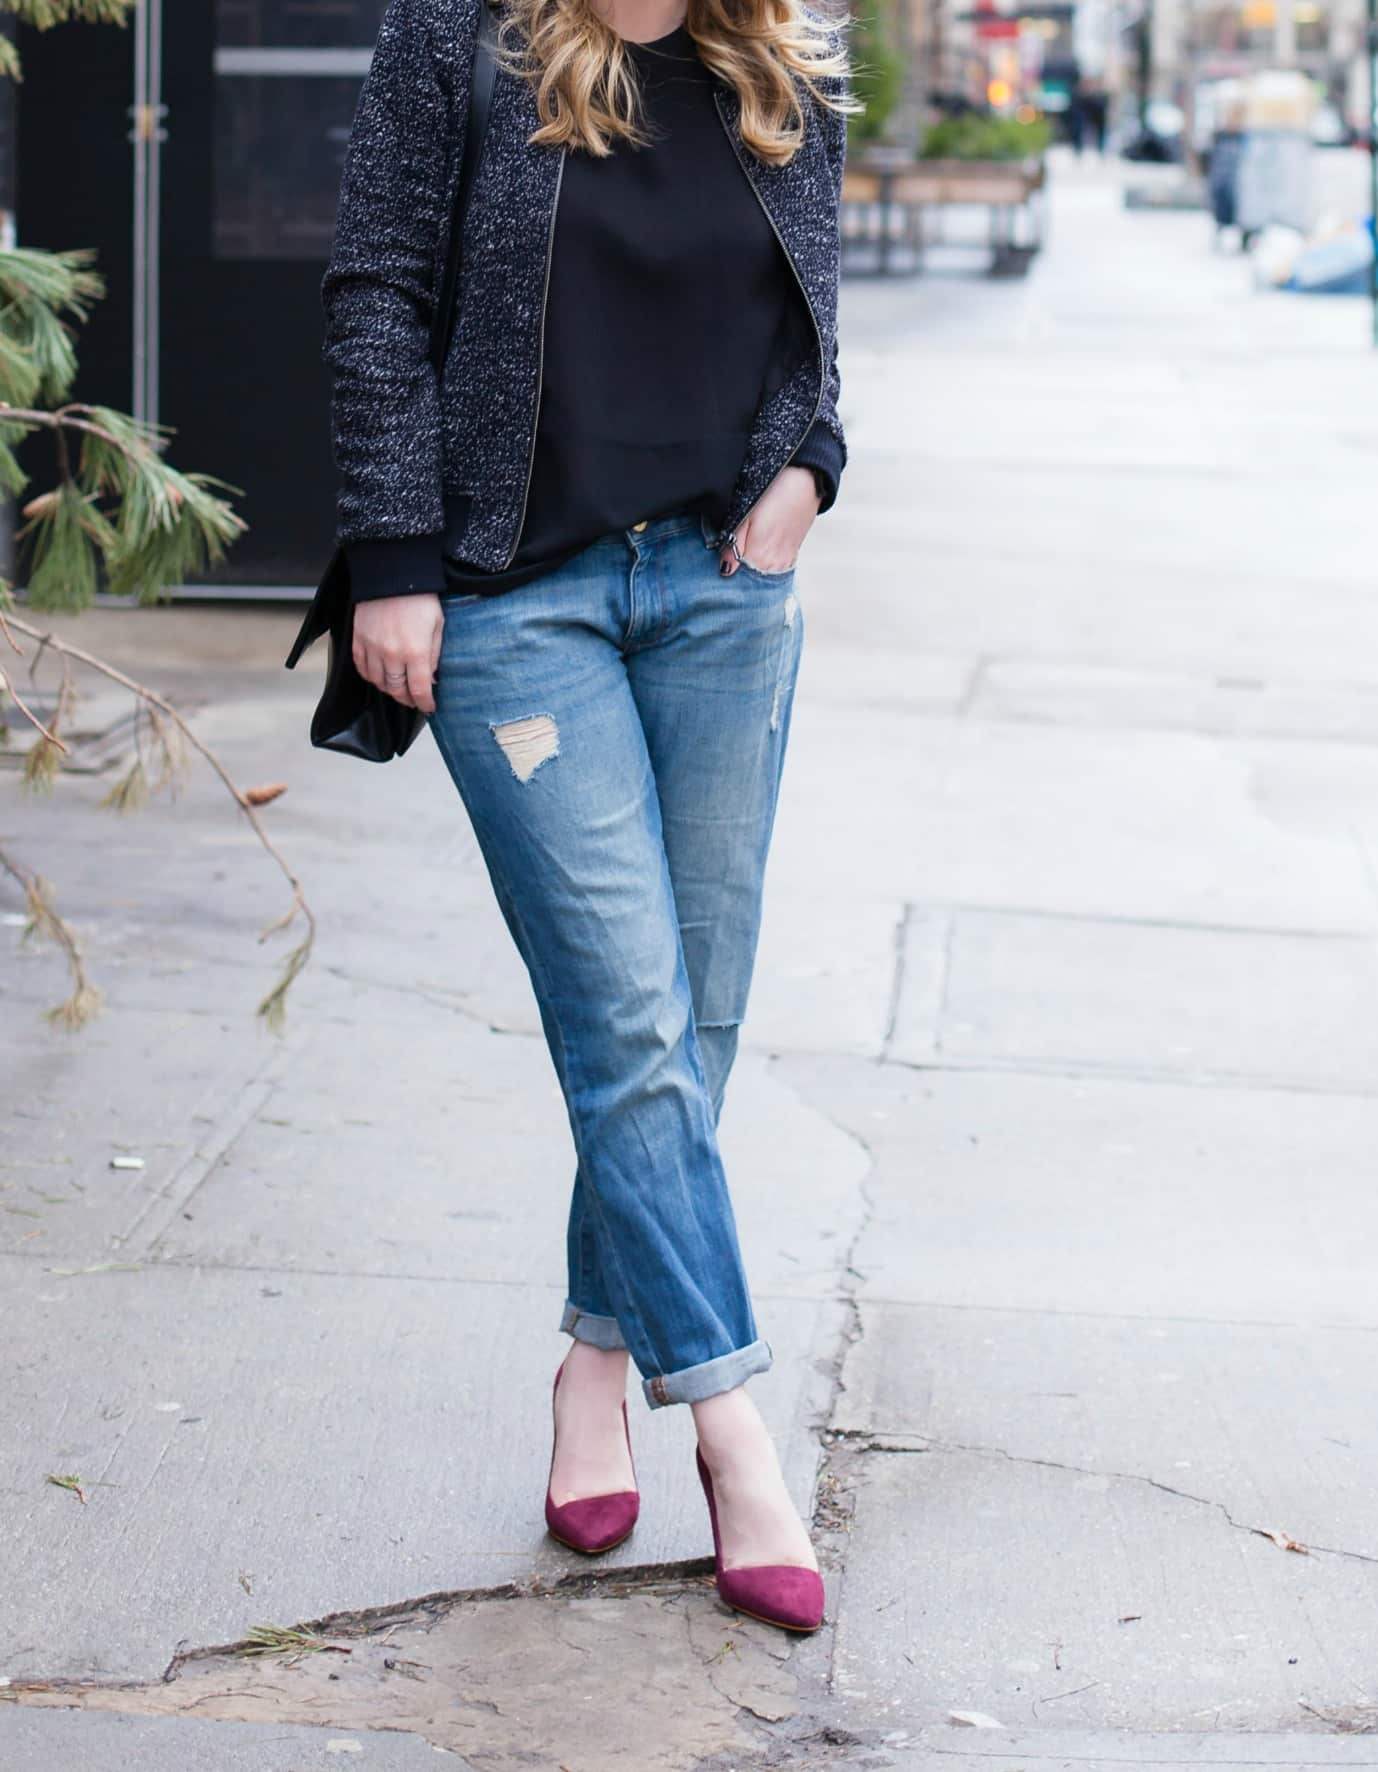 The Bomber Jacket – wit & whimsy